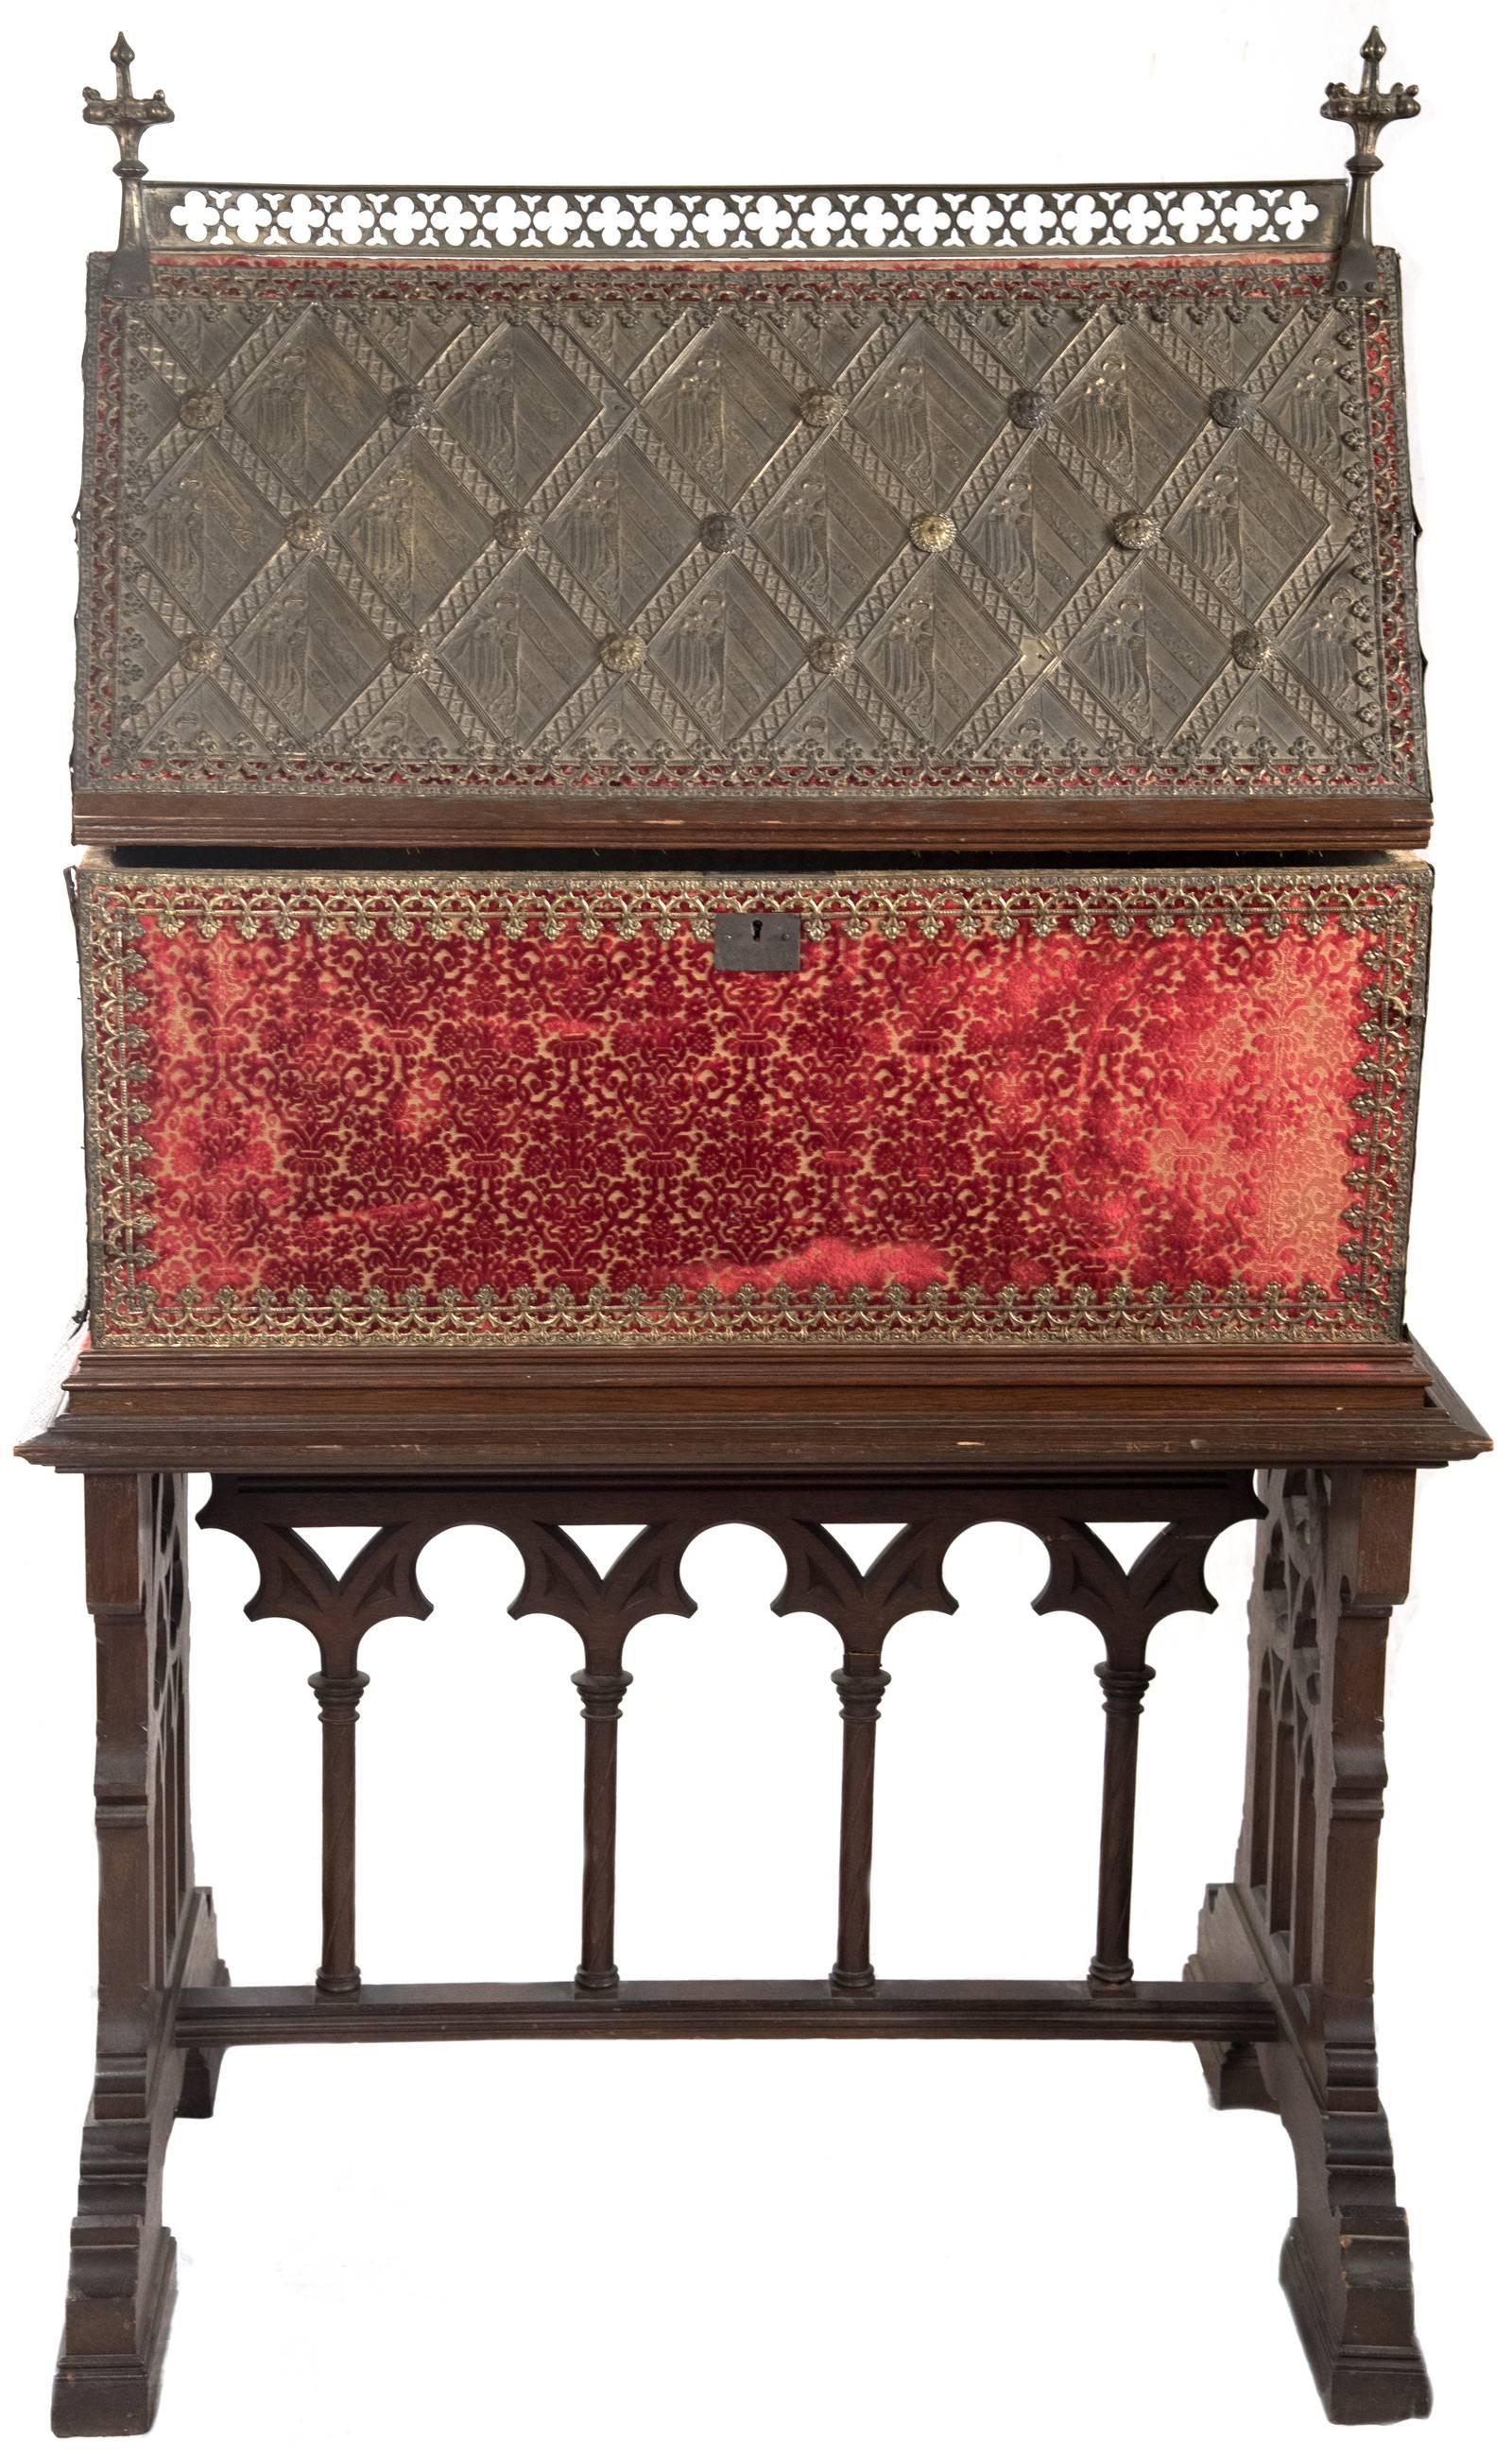 An early 19th century chasse, or box reliquary, its form resembling the architectural structure of a church with an oblong base, straight sides and two sloping faces meeting at a central ridge marked by a raised bronze strip pierced with a repeating